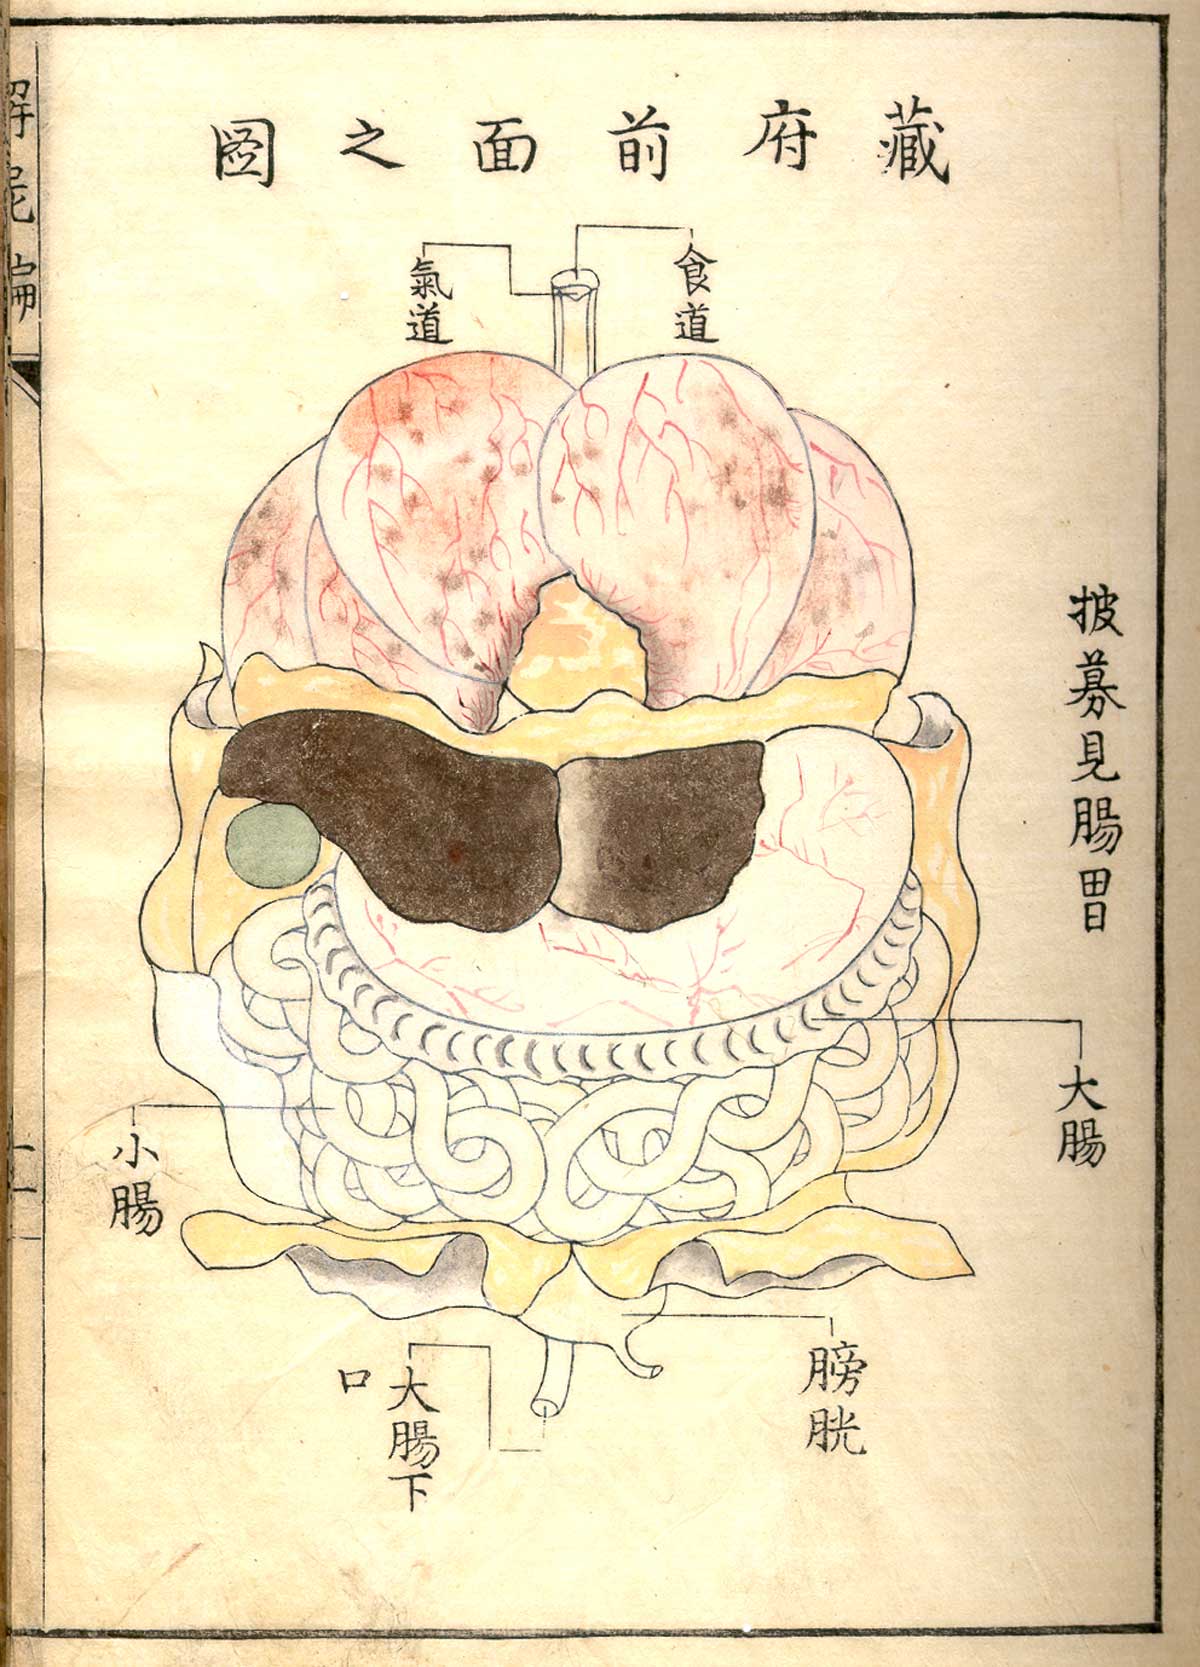 Hand colored woodcut of the internal organs with lungs and heart at top, stomach and liver in the middle and intestines and bladder at the bottom with Japanese text describing some of the structures, from Shinnin Kawaguchi's Kaishi hen, NLM Call no.: WZ 260 K21k 1772.